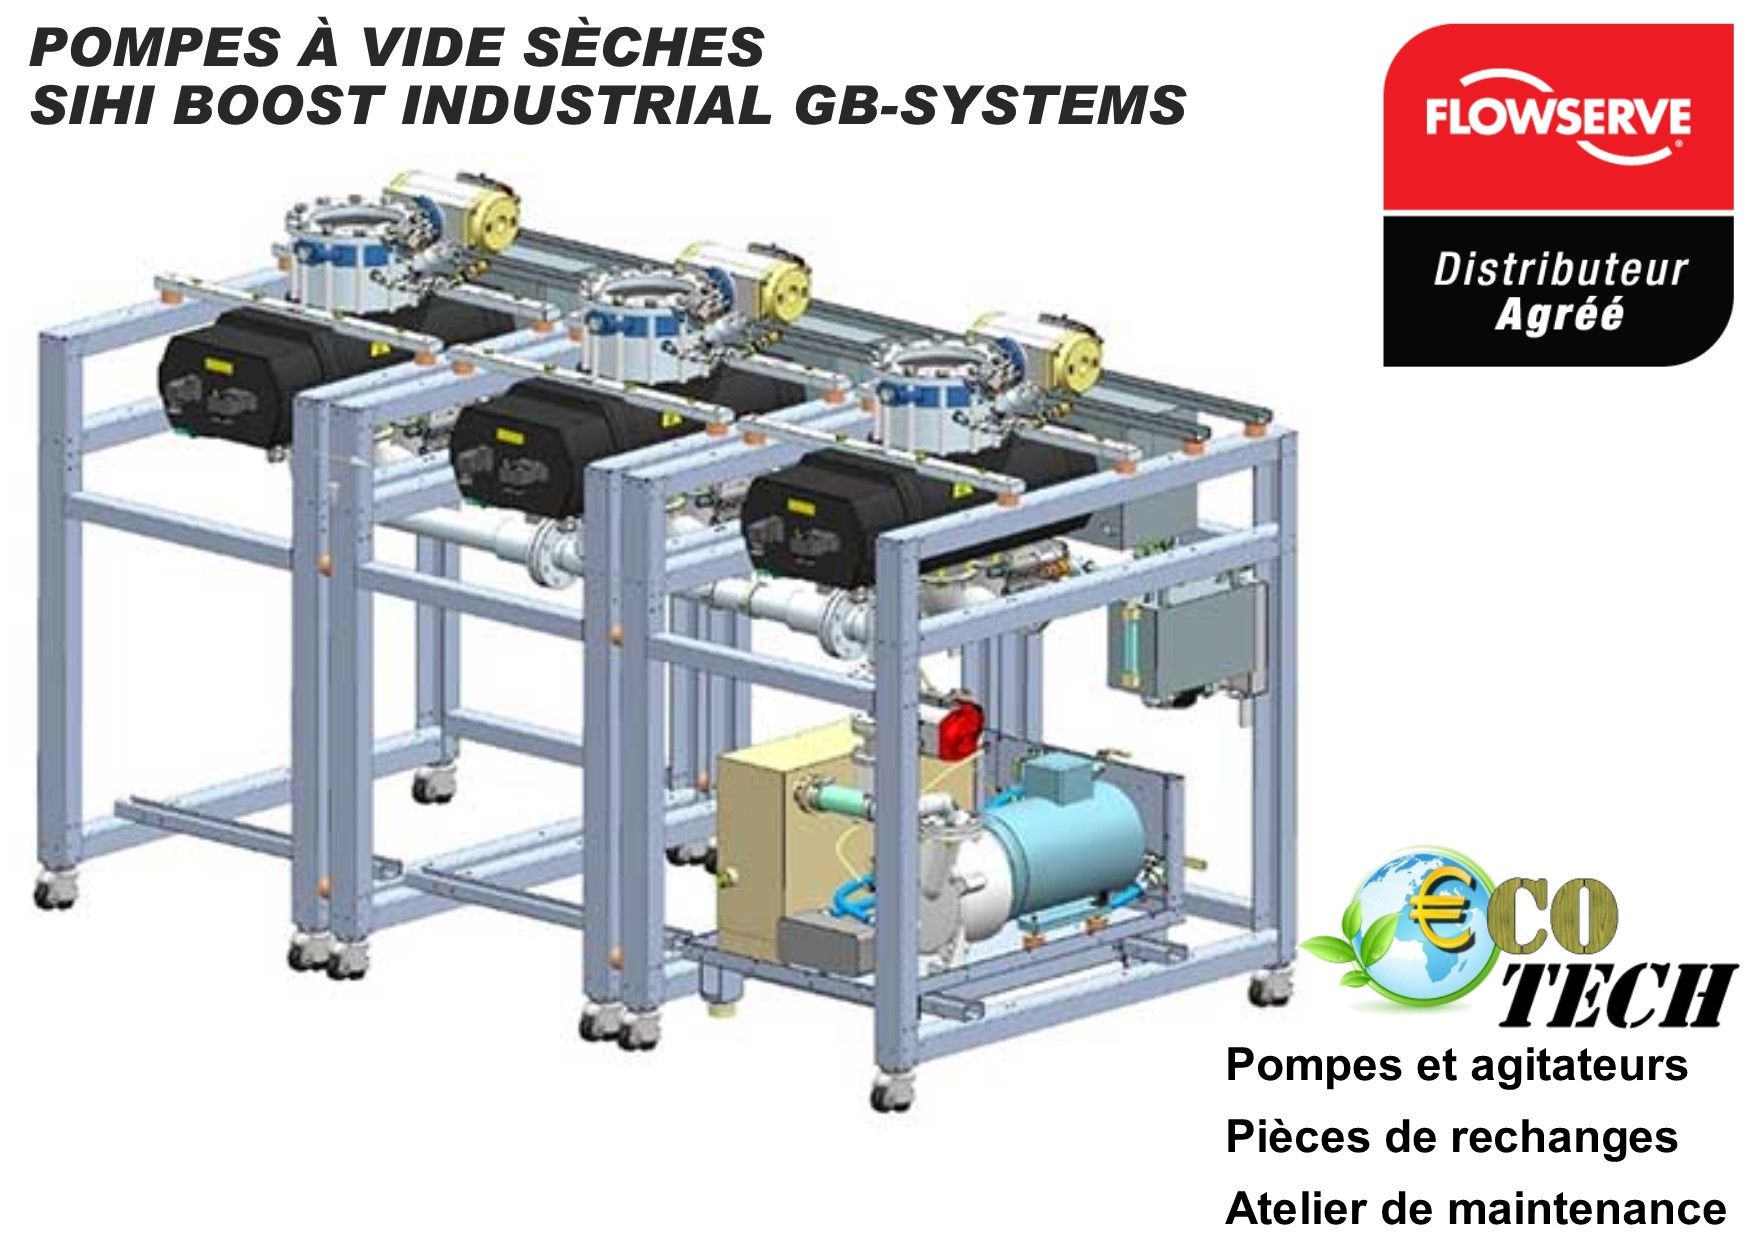 Pompes à vide sèches - sihi boost industrial gb-systems distributeur normandie_0